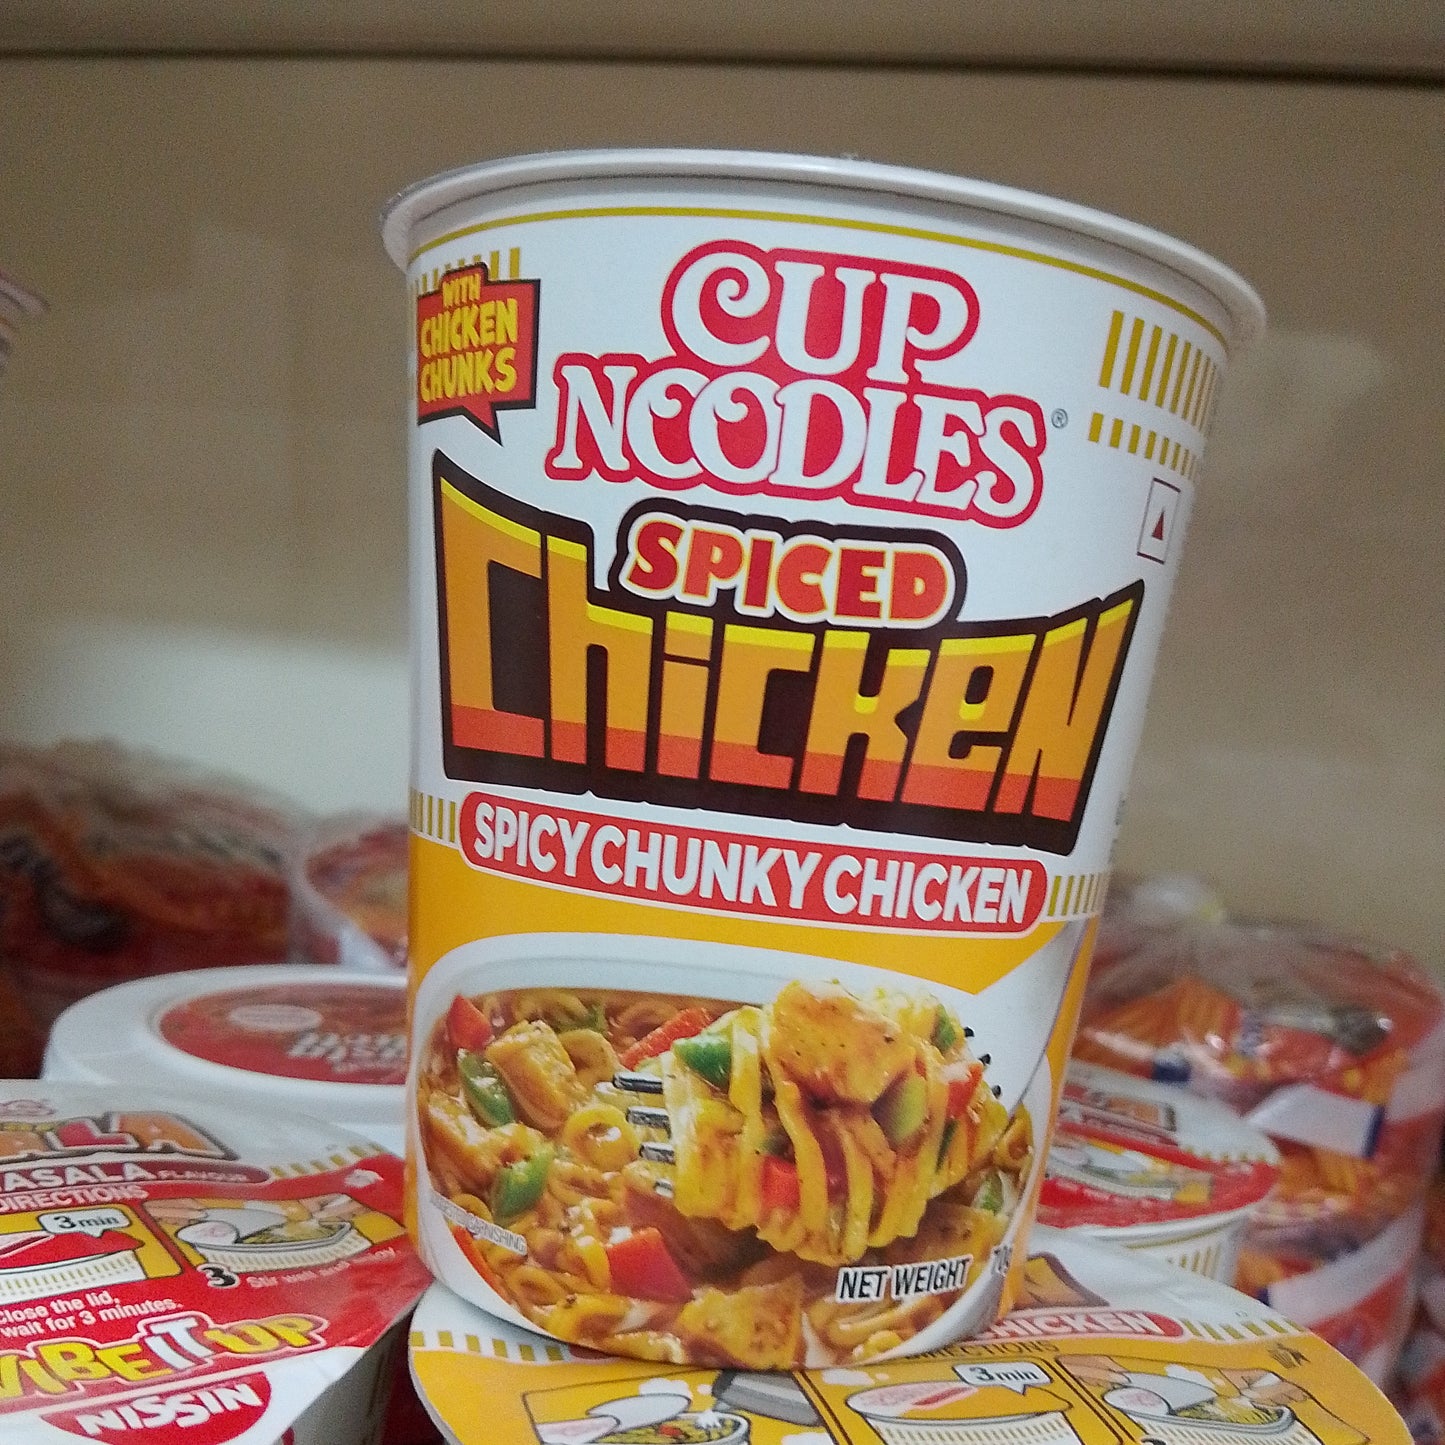 Cup Noodles Spiced Chicken (70g)